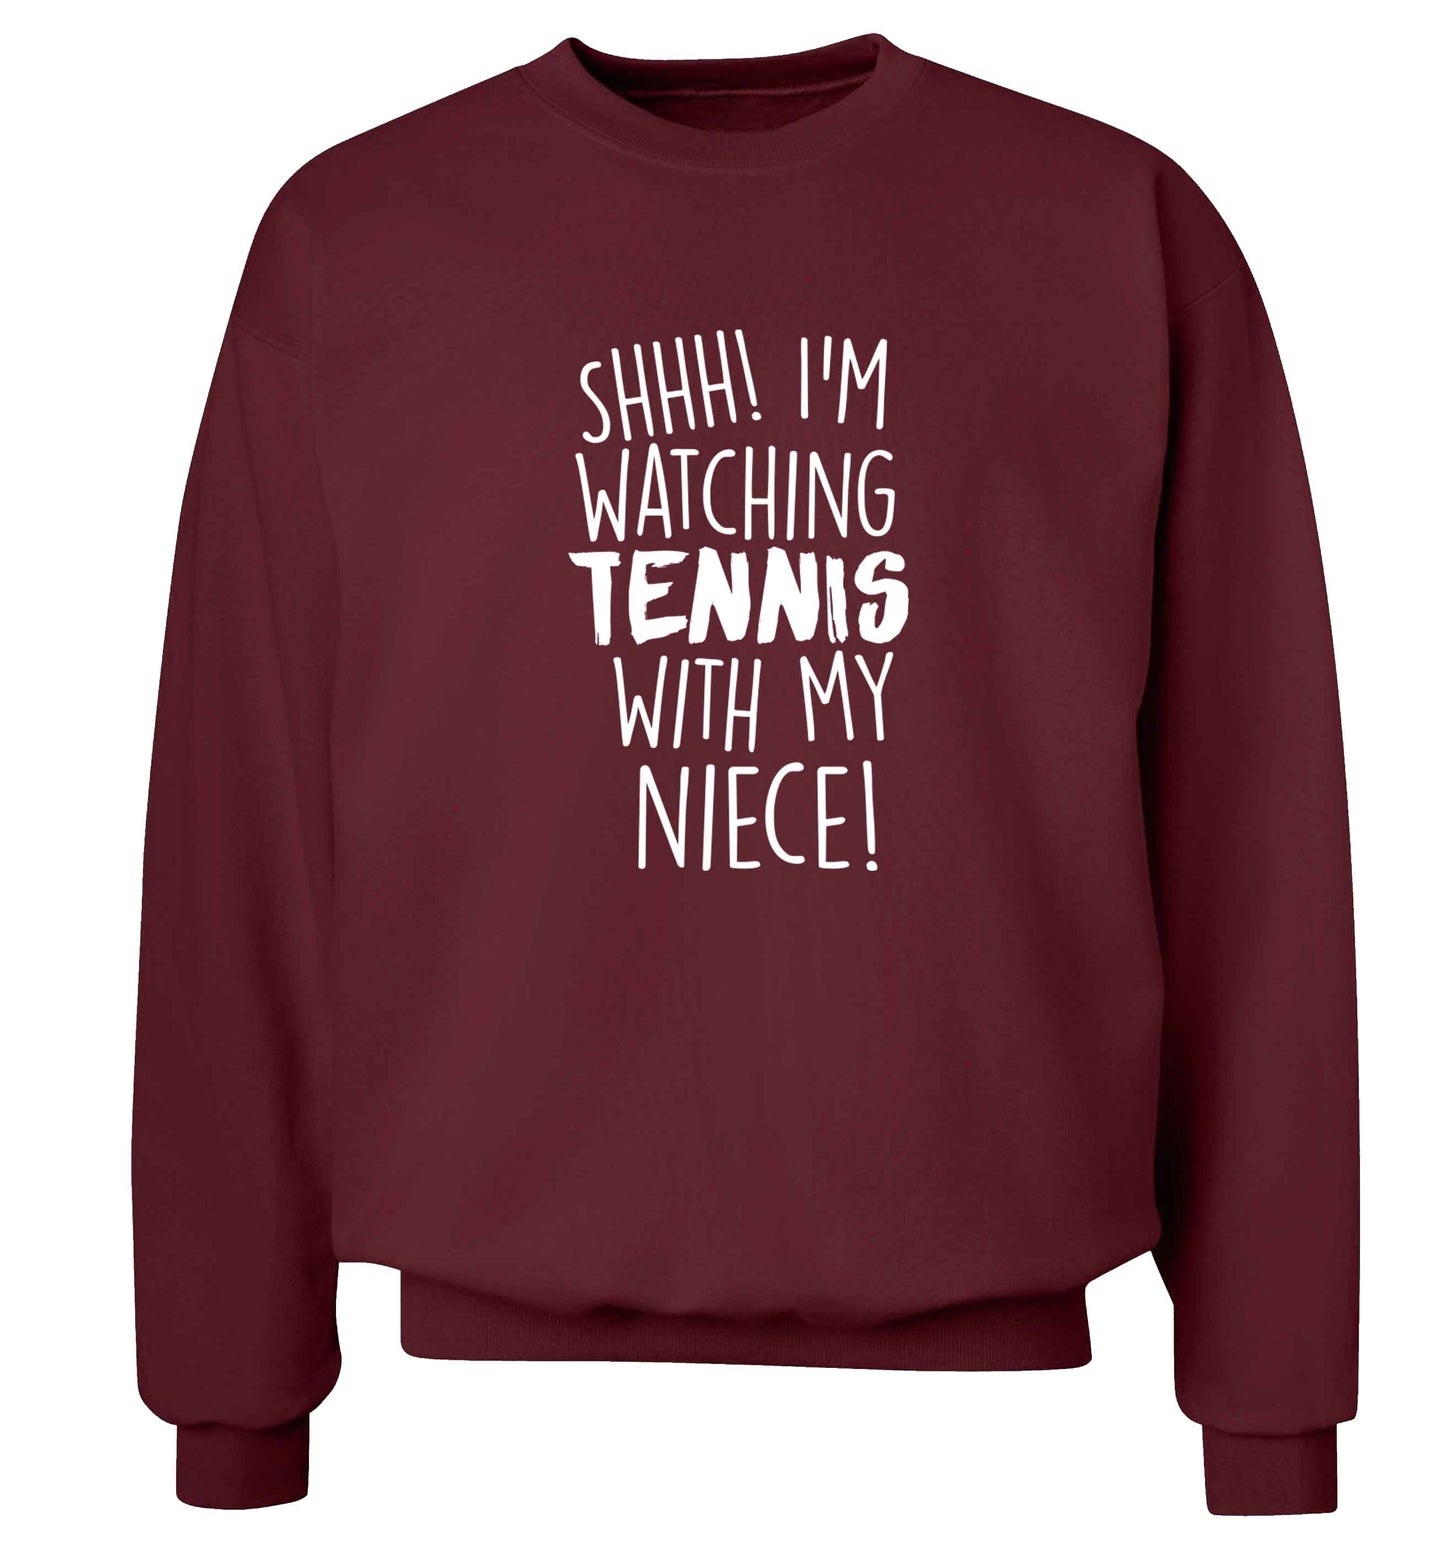 Shh! I'm watching tennis with my niece! Adult's unisex maroon Sweater 2XL